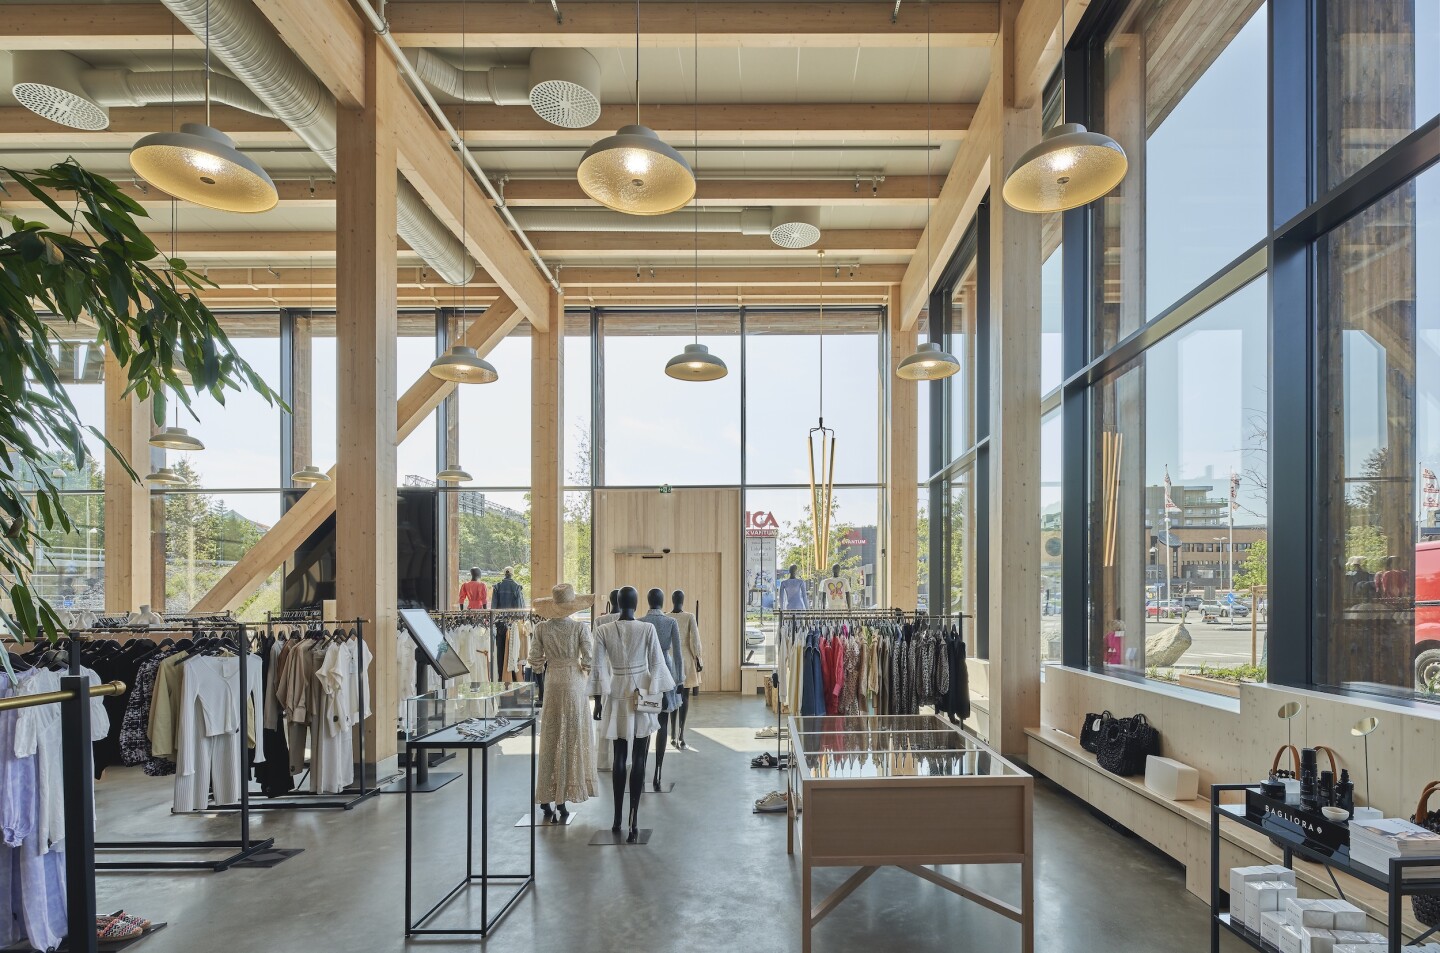 The Nodi's first floor is taken up by retail space